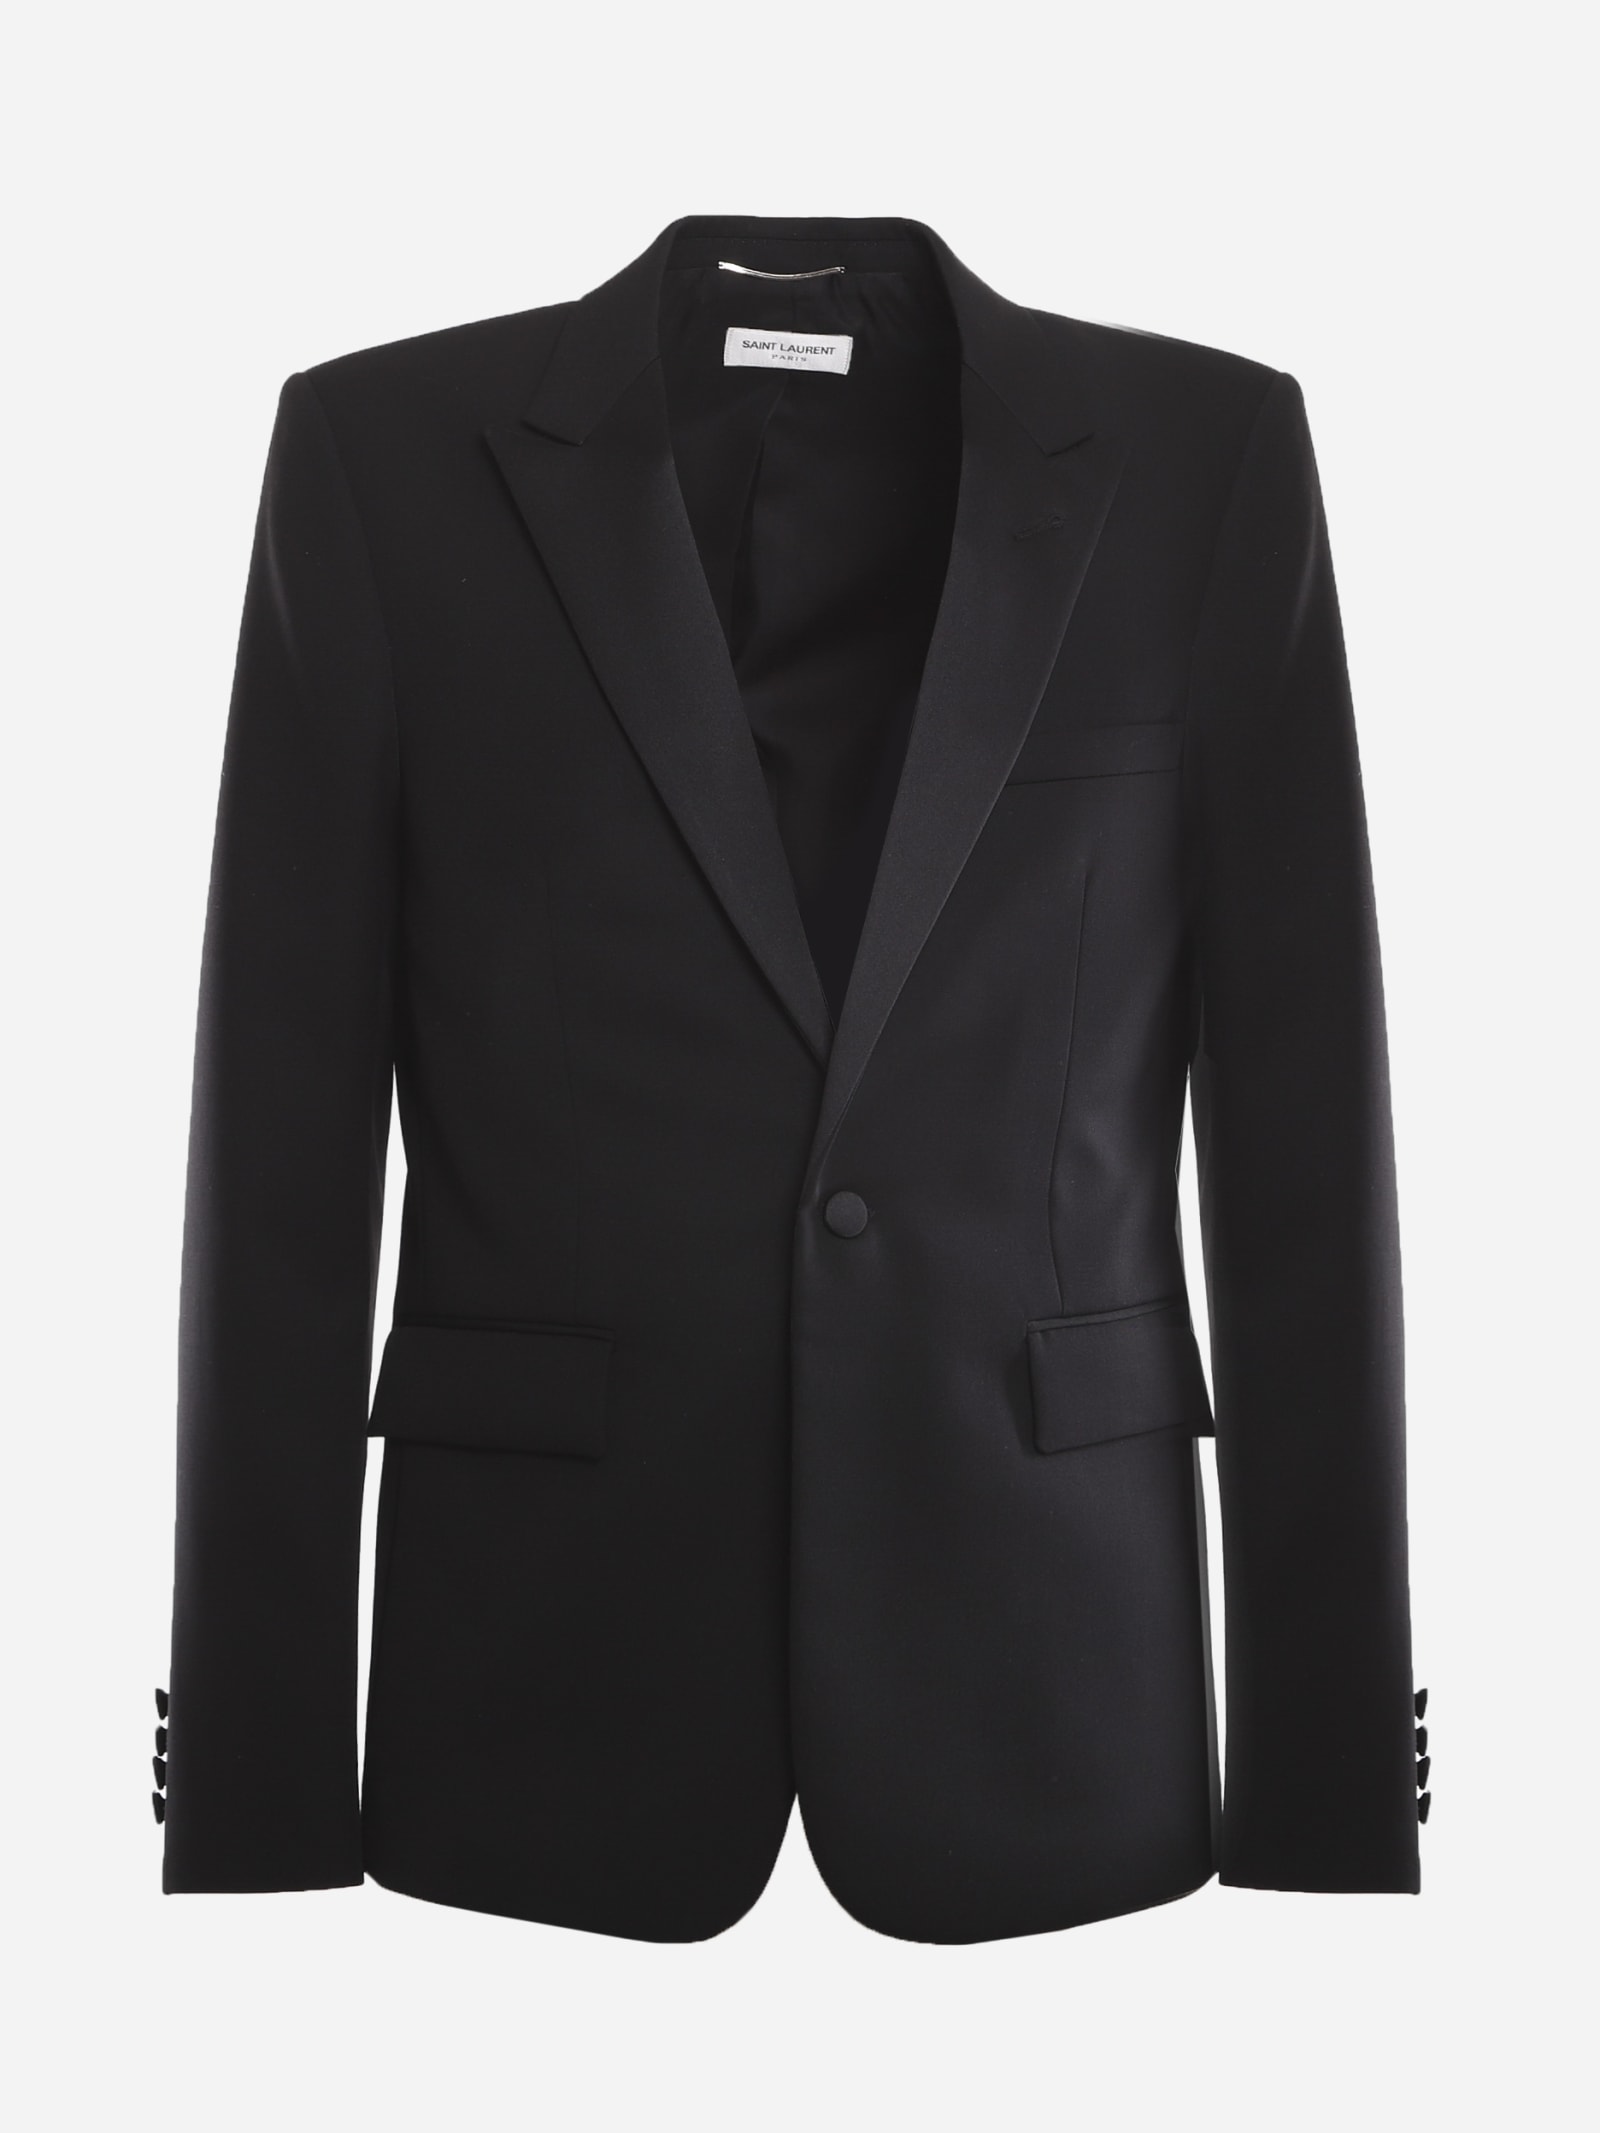 SAINT LAURENT SUIT MADE OF WOOL WITH SATIN INSERTS,615987 Y512W1000